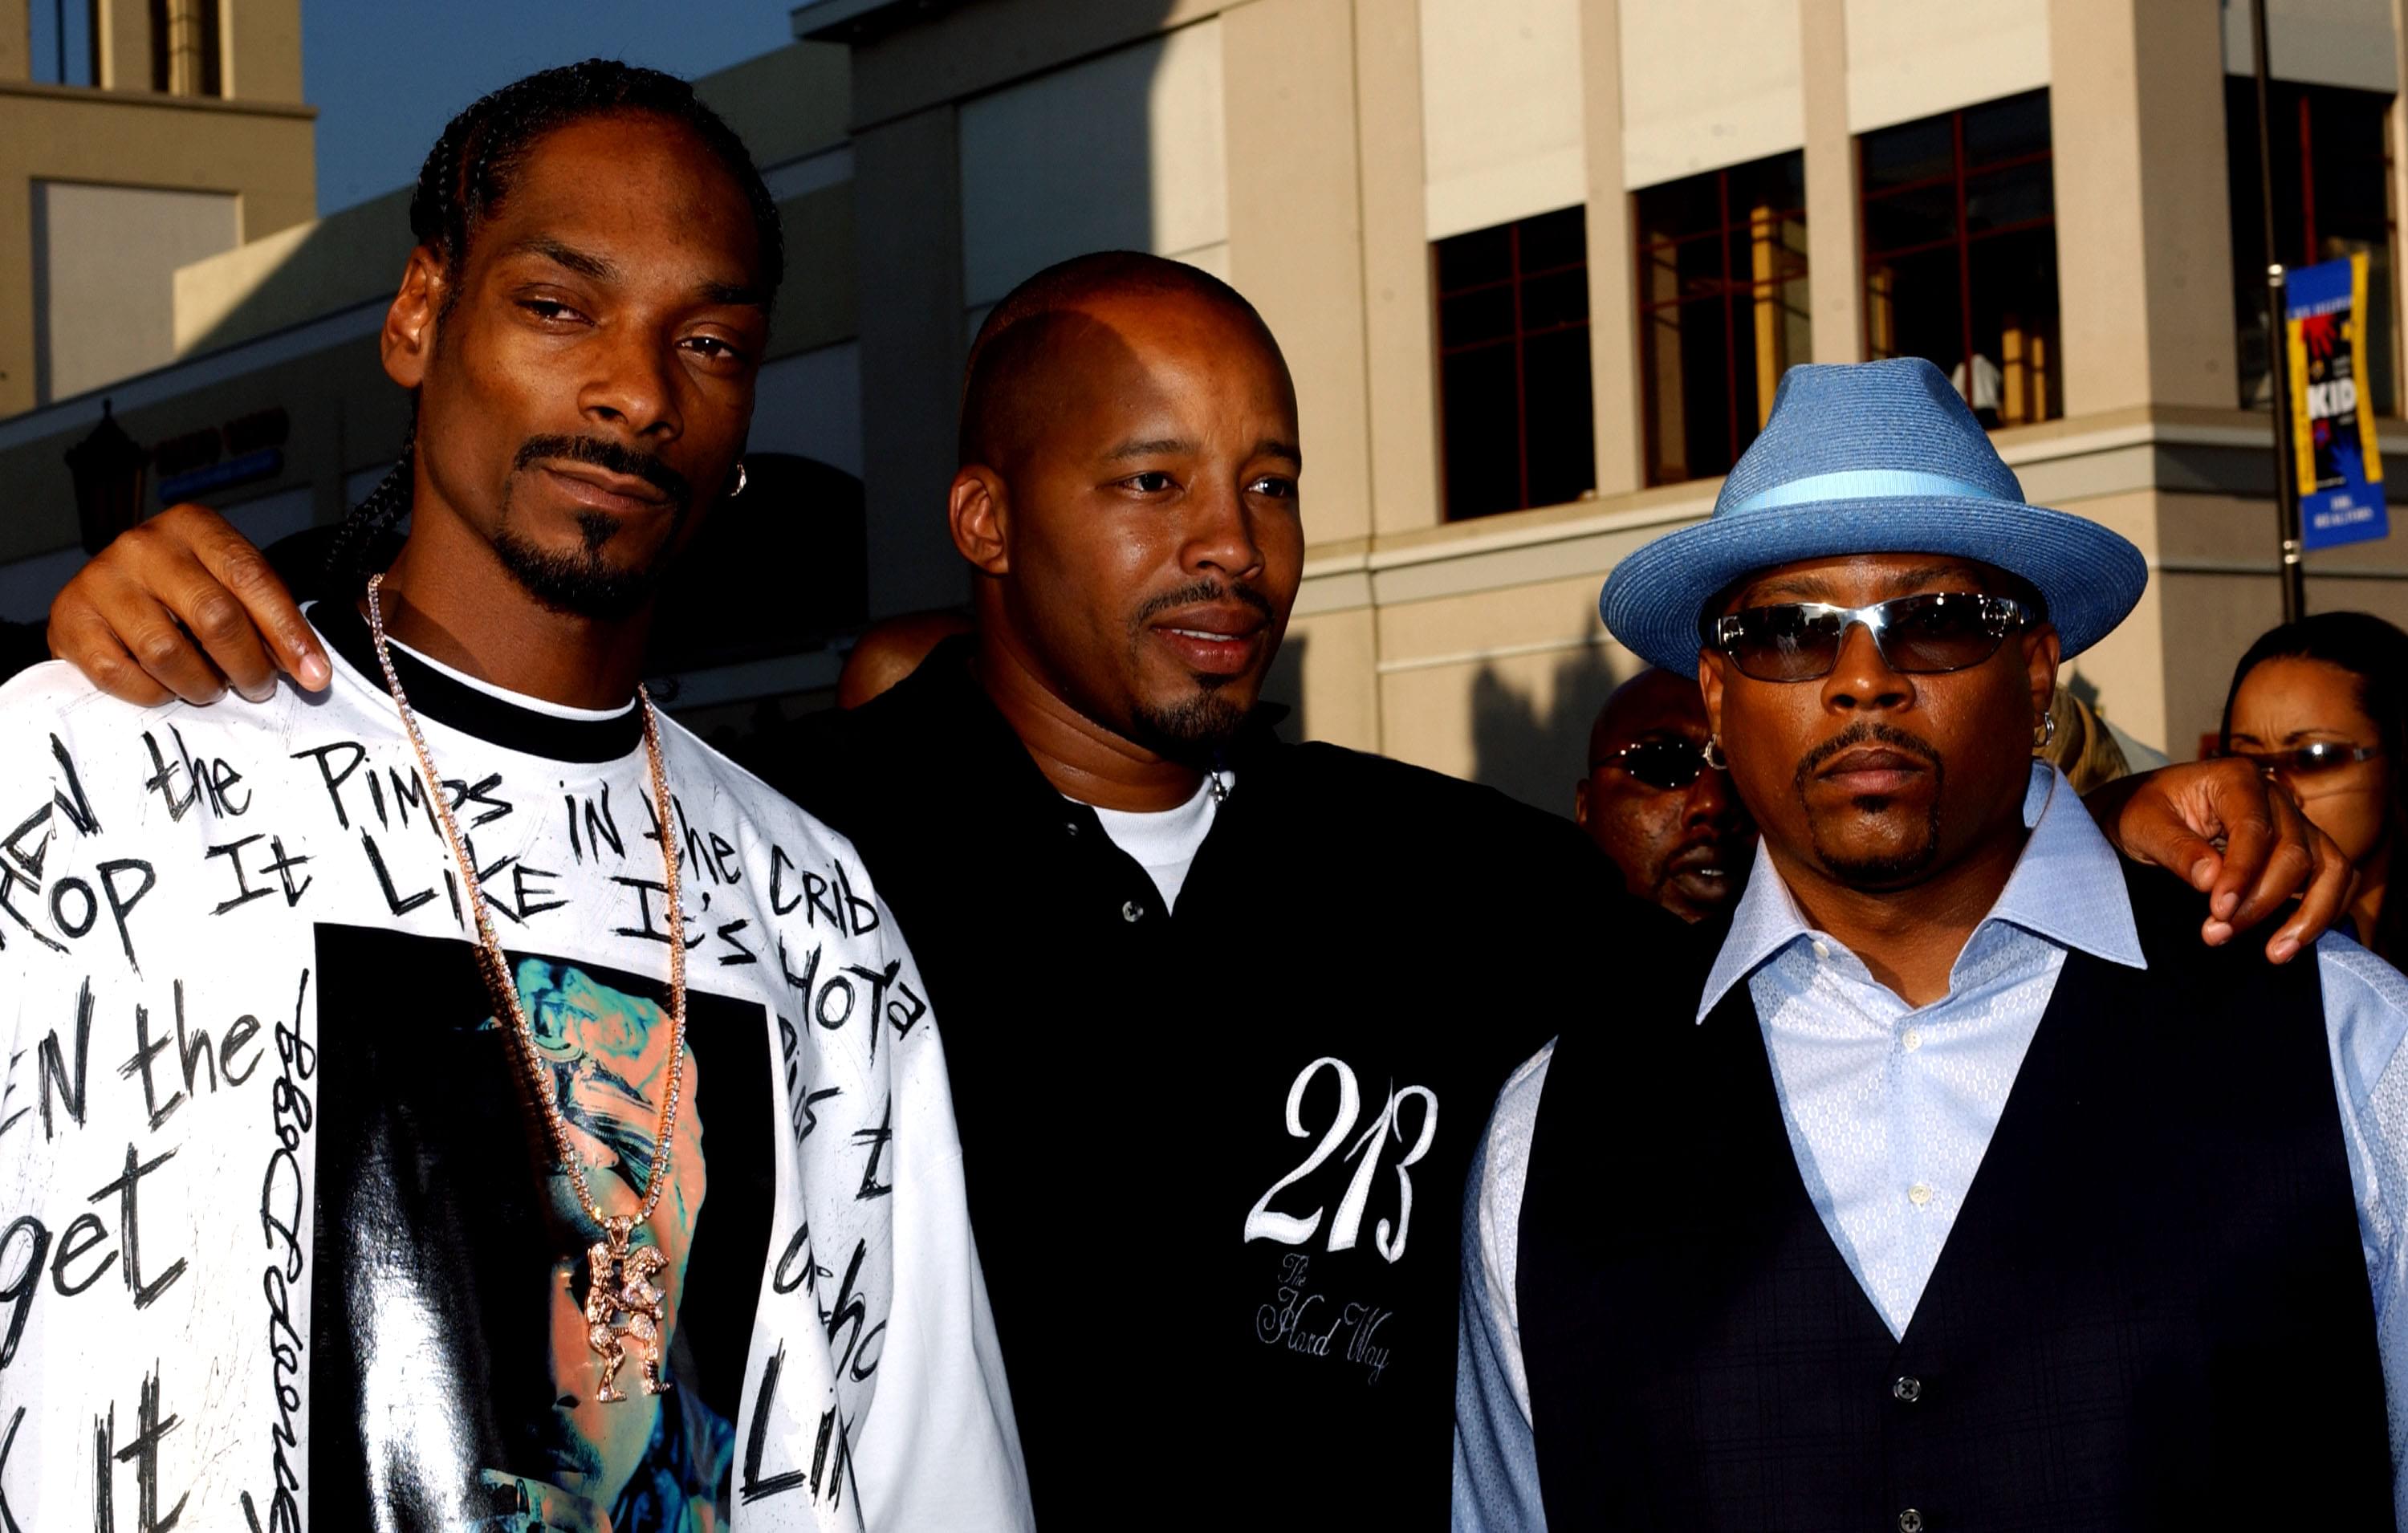 YouTube Acquires “G-Funk” Documentary Featuring Warren G, Snoop Dogg, Ice Cube & More